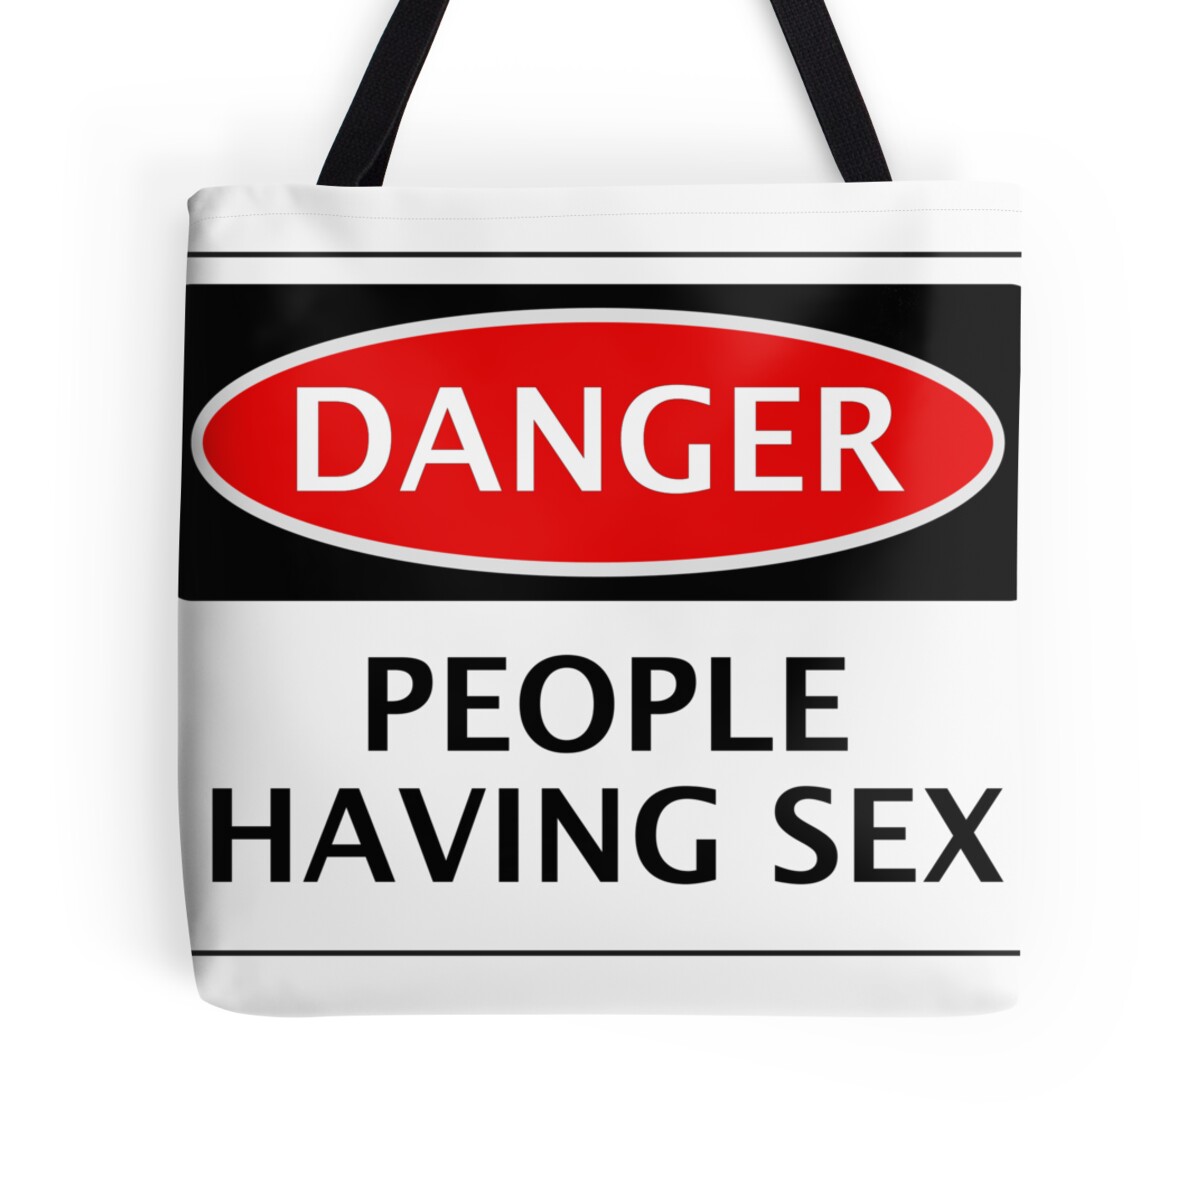 Danger People Having Sex Funny Fake Safety Sign Signage Tote Bags By Dangersigns Redbubble 6419